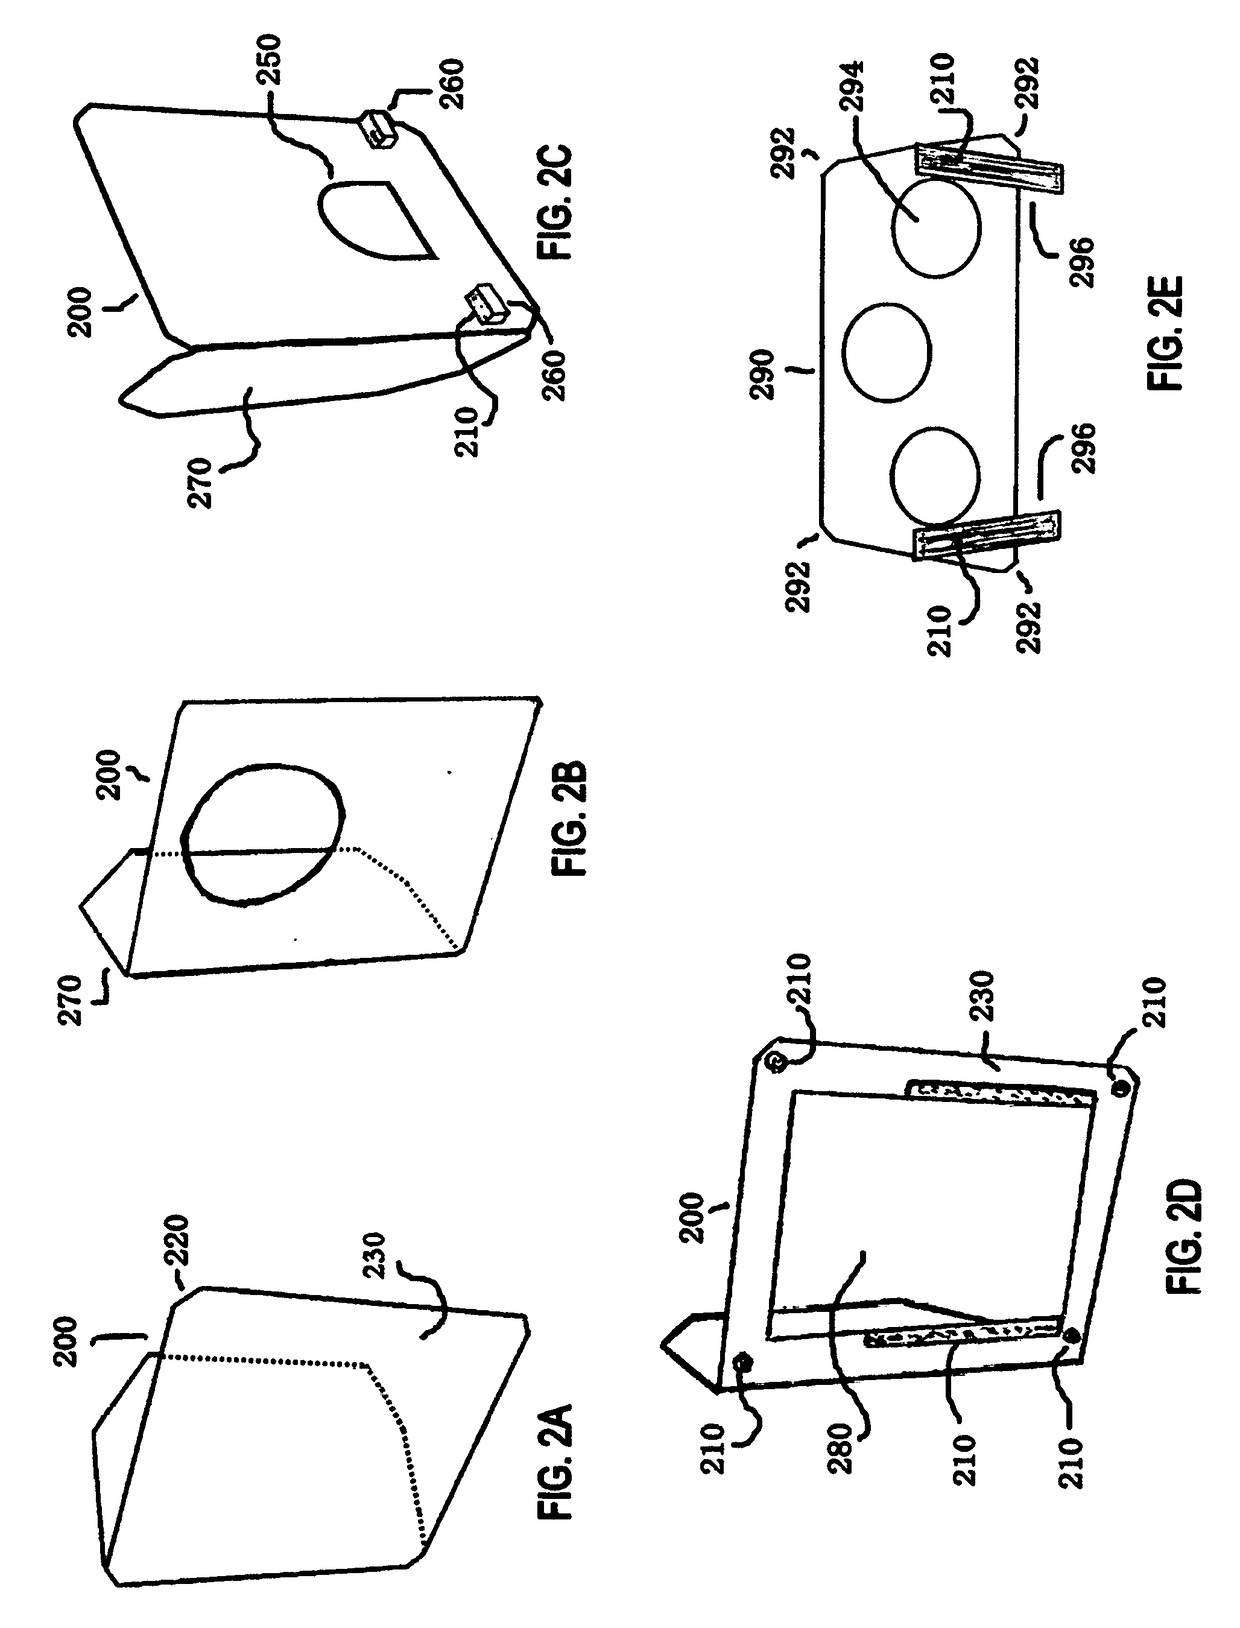 Detachable multi-functional housing compartment insert with attachable accessory templates